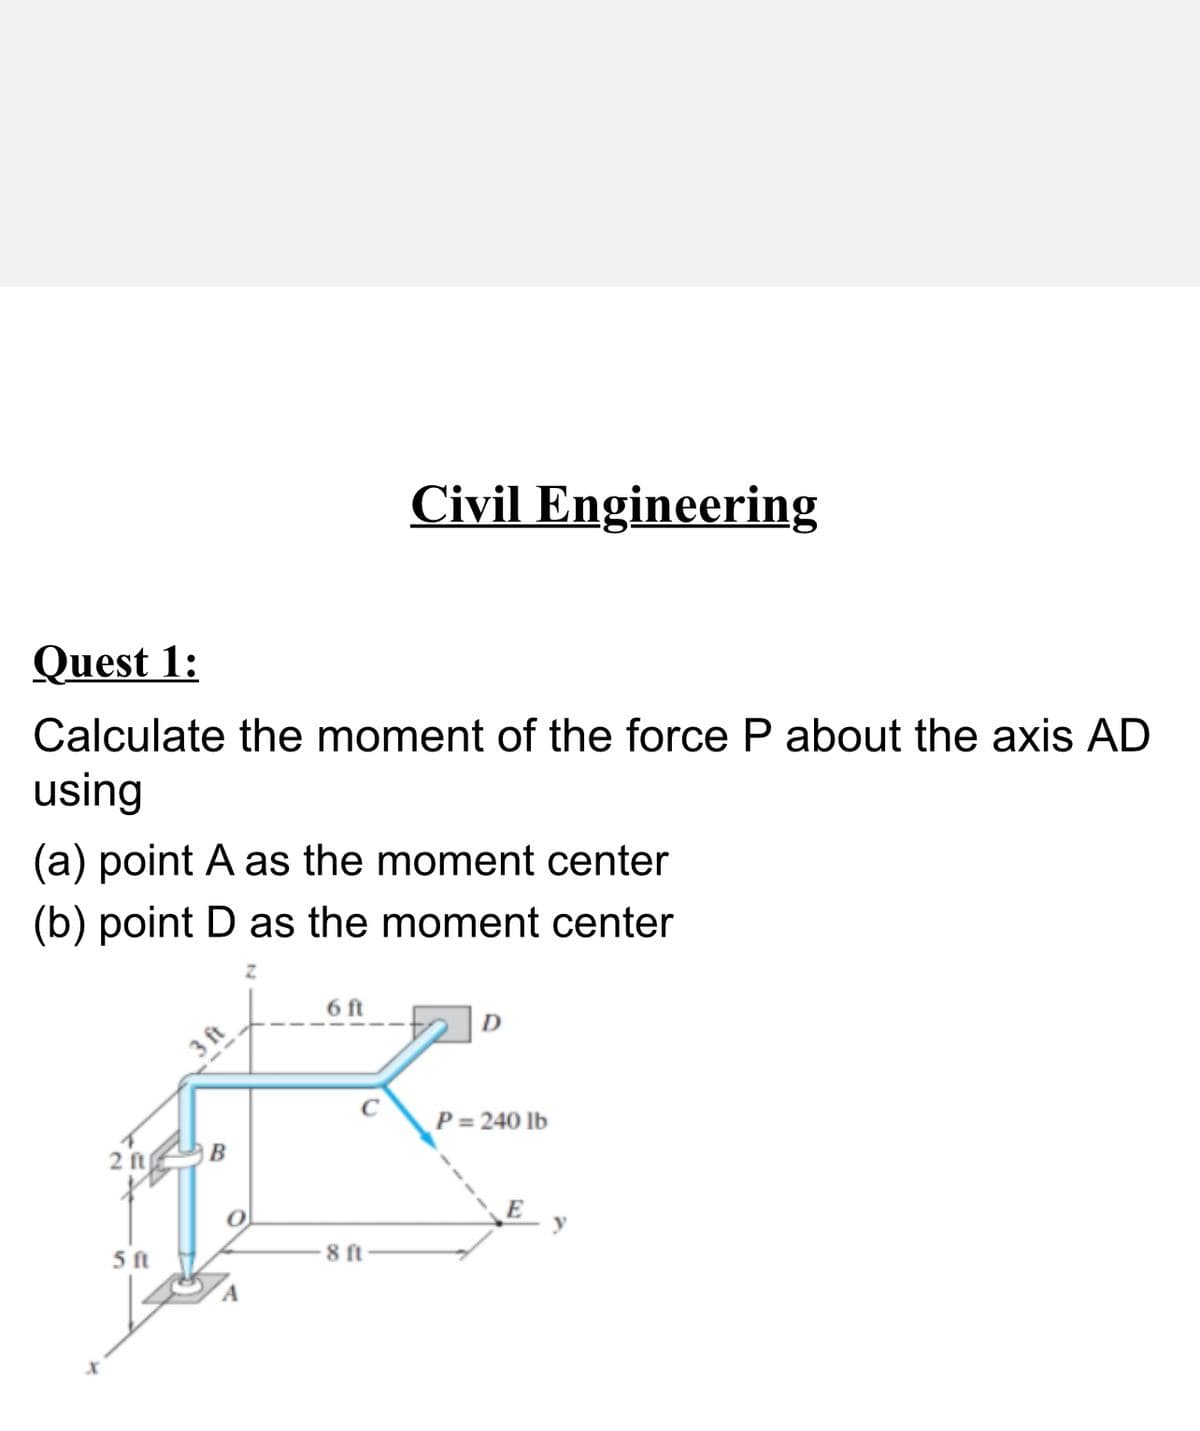 Civil Engineering
Quest 1:
Calculate the moment of the force P about the axis AD
using
(a) point A as the moment center
(b) point D as the moment center
6 ft
3 ft
P= 240 Ib
2 ft
5 ft
8 ft
